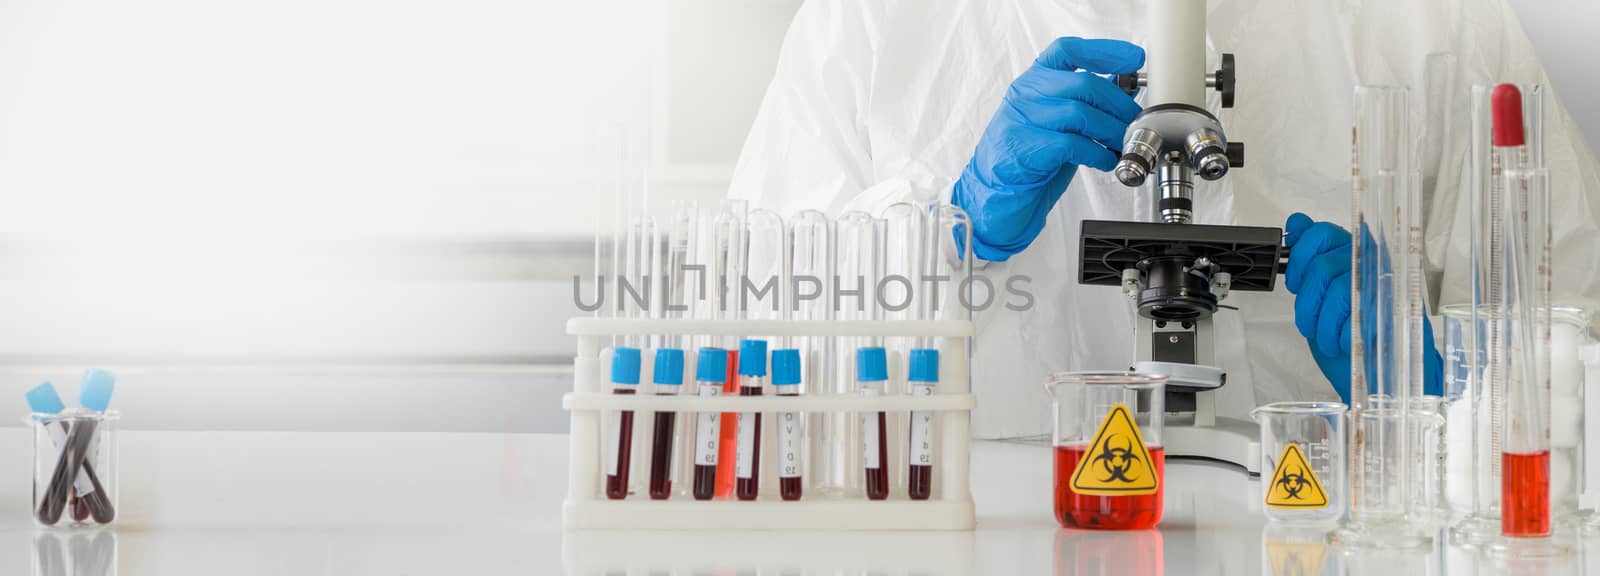 Researchers use microscopes to look at blood samples of infected people.
Coronavirus disease 2019 (COVID-19)  testing process in a laboratory preventing the spread of viral research.